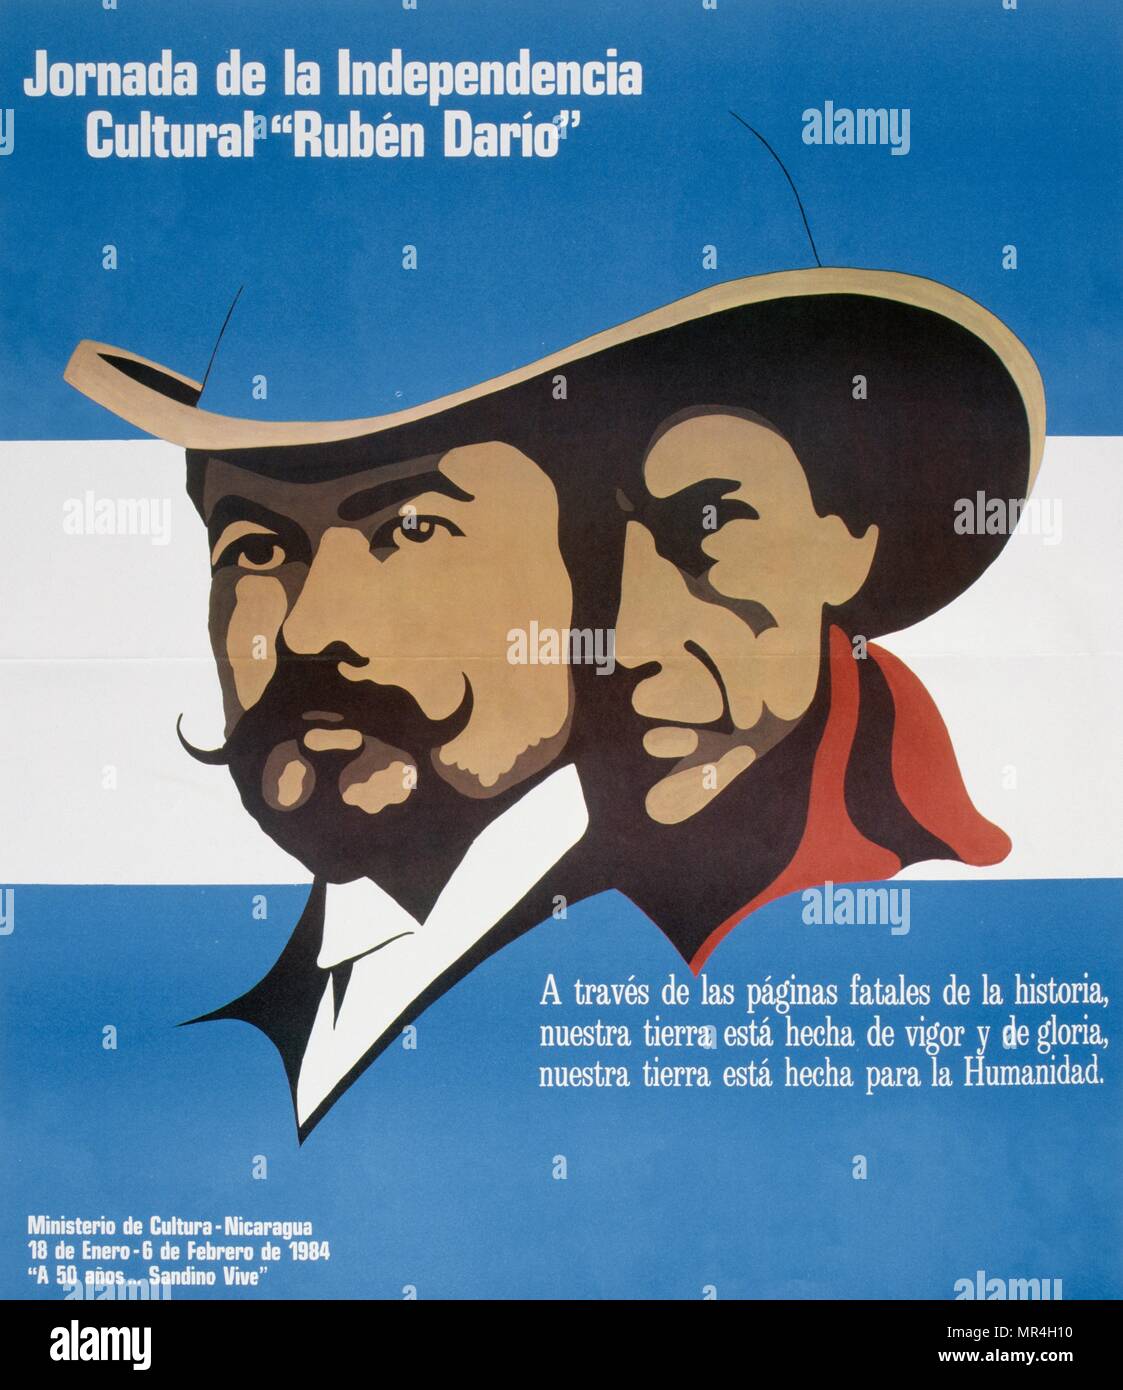 Sandinista National Liberation Front (FSLN) propaganda poster in Nicaragua. The party was named after Augusto Caesar Sandino, who led the Nicaraguan resistance against the United States occupation of Nicaragua in the 1930s. The FSLN overthrew Anastasio Somoza in 1979, ending the Somoza dynasty, and established a revolutionary government in its place. Following their seizure of power, the Sandinistas ruled Nicaragua from 1979 to 1990, first as part of a Junta of National Reconstruction. Stock Photo